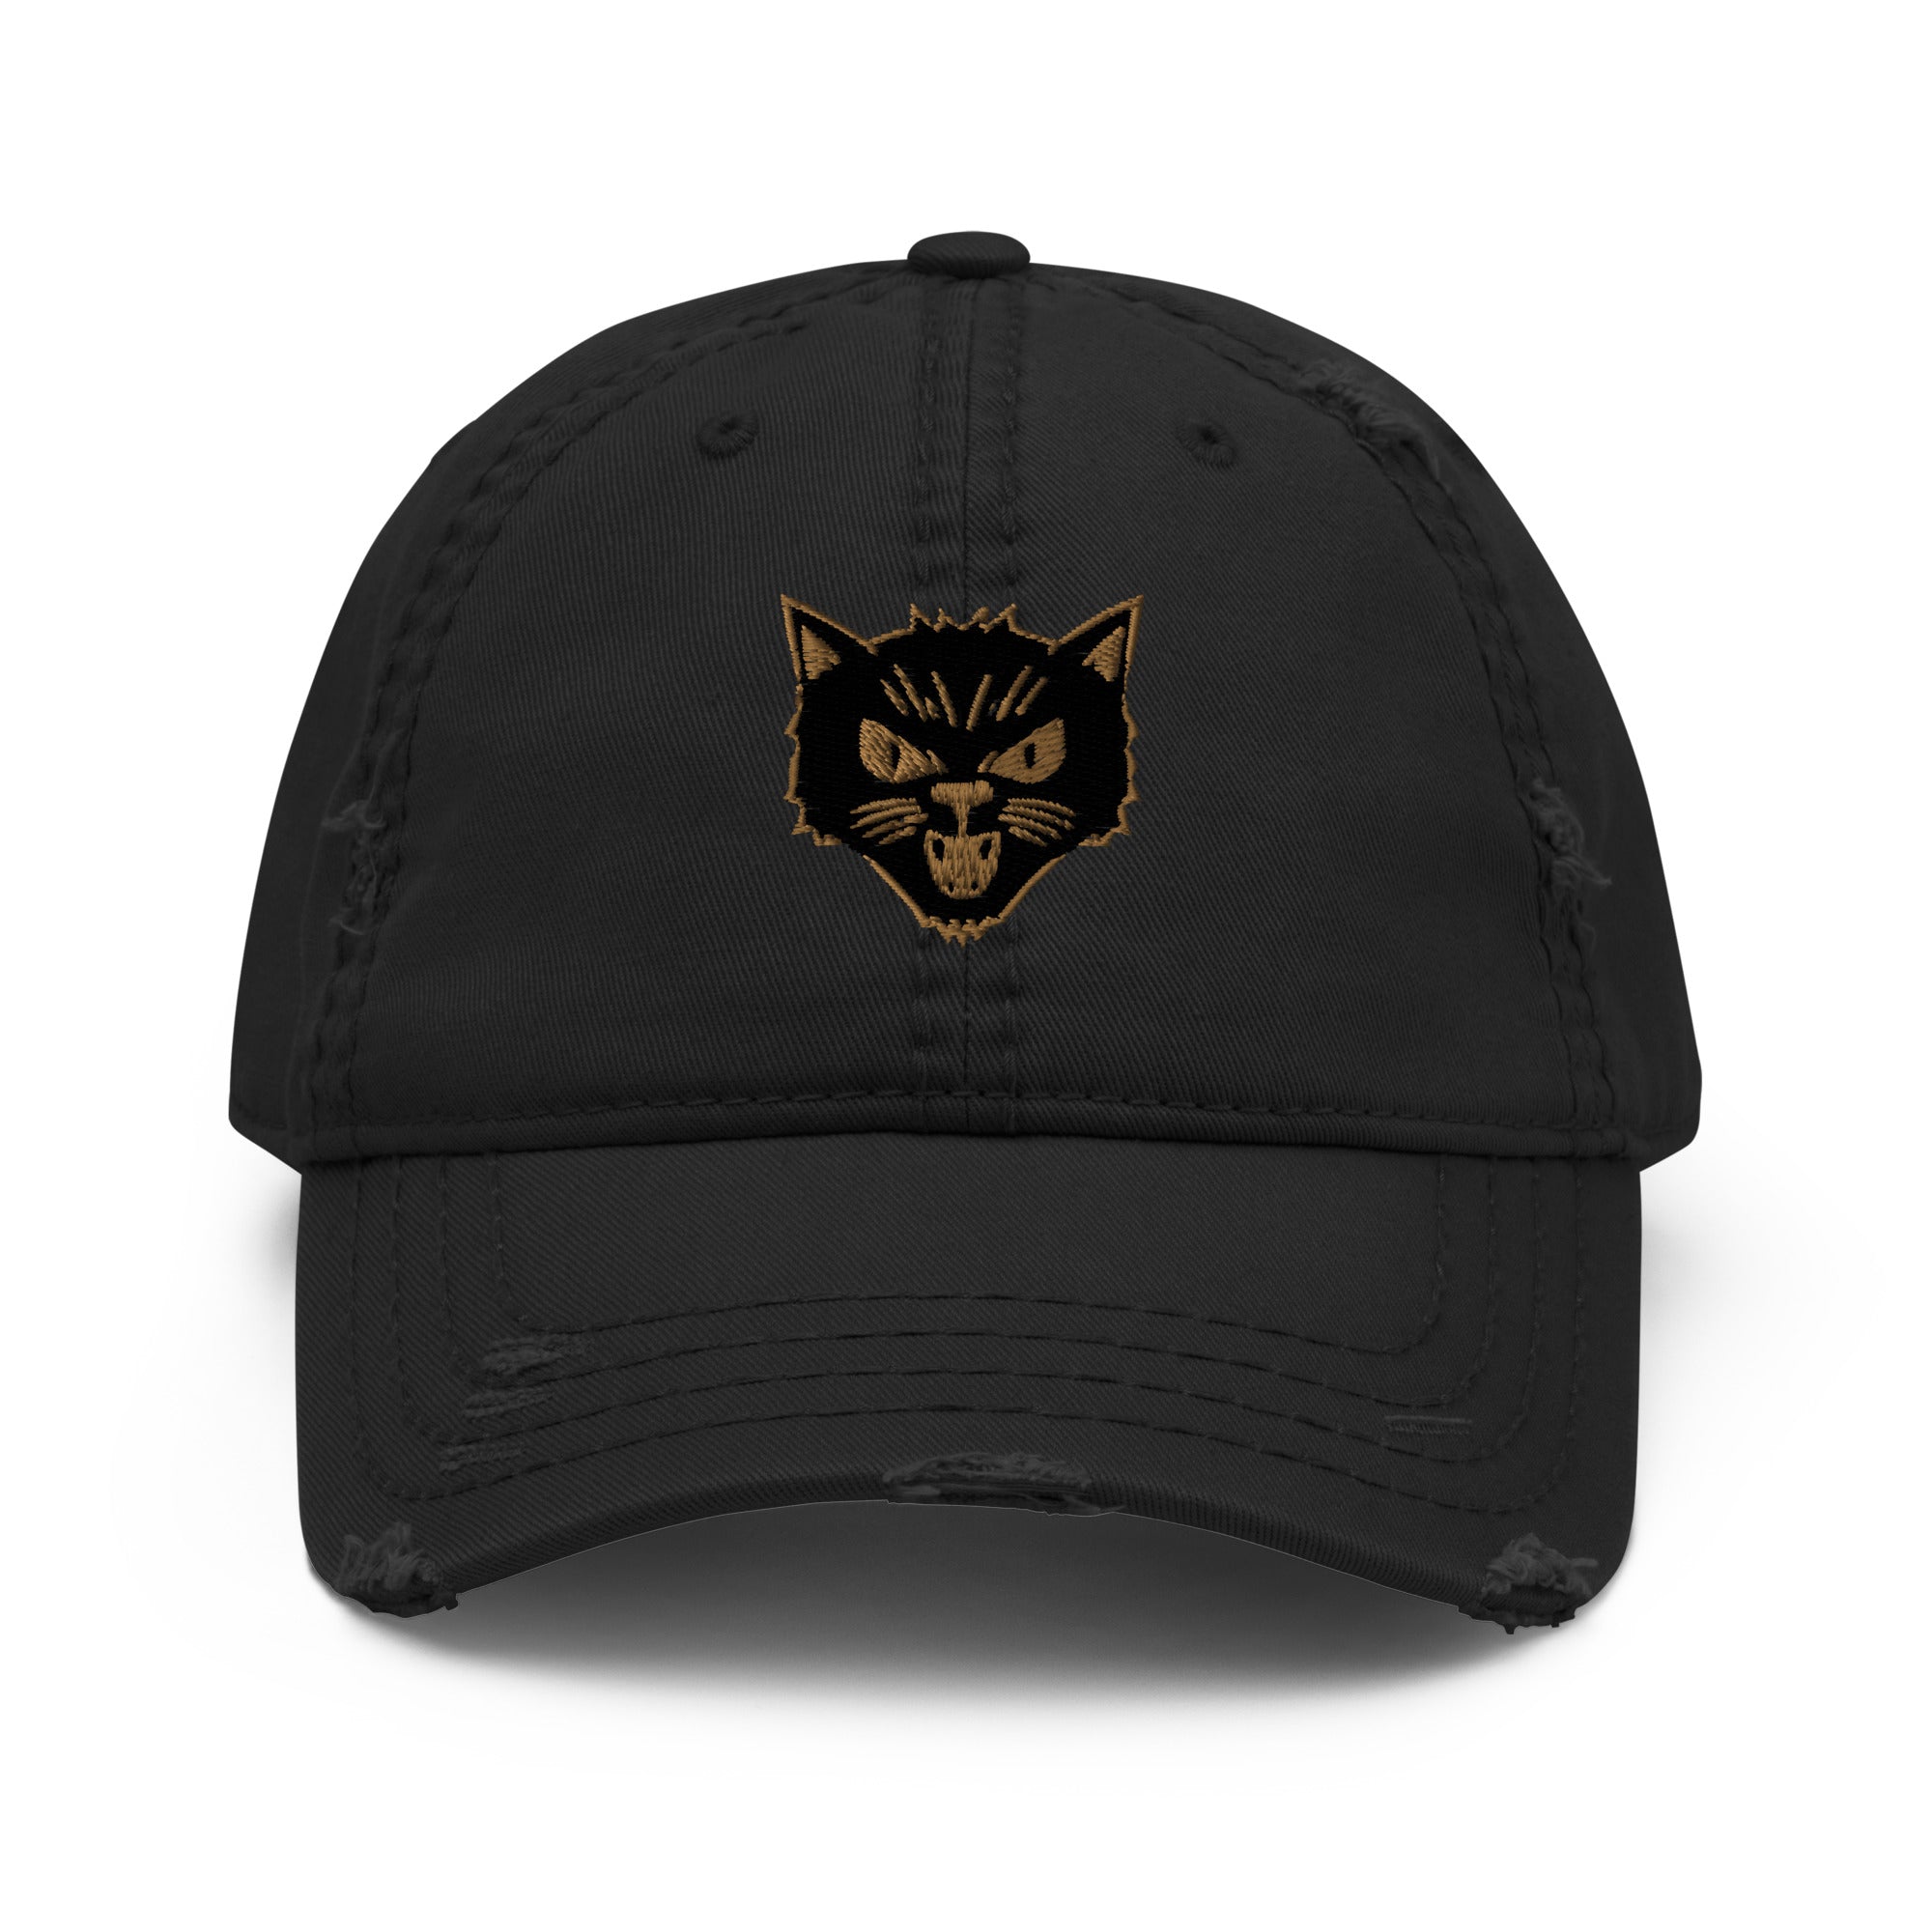 JHS - Bad Kitty Distressed Dad Hat